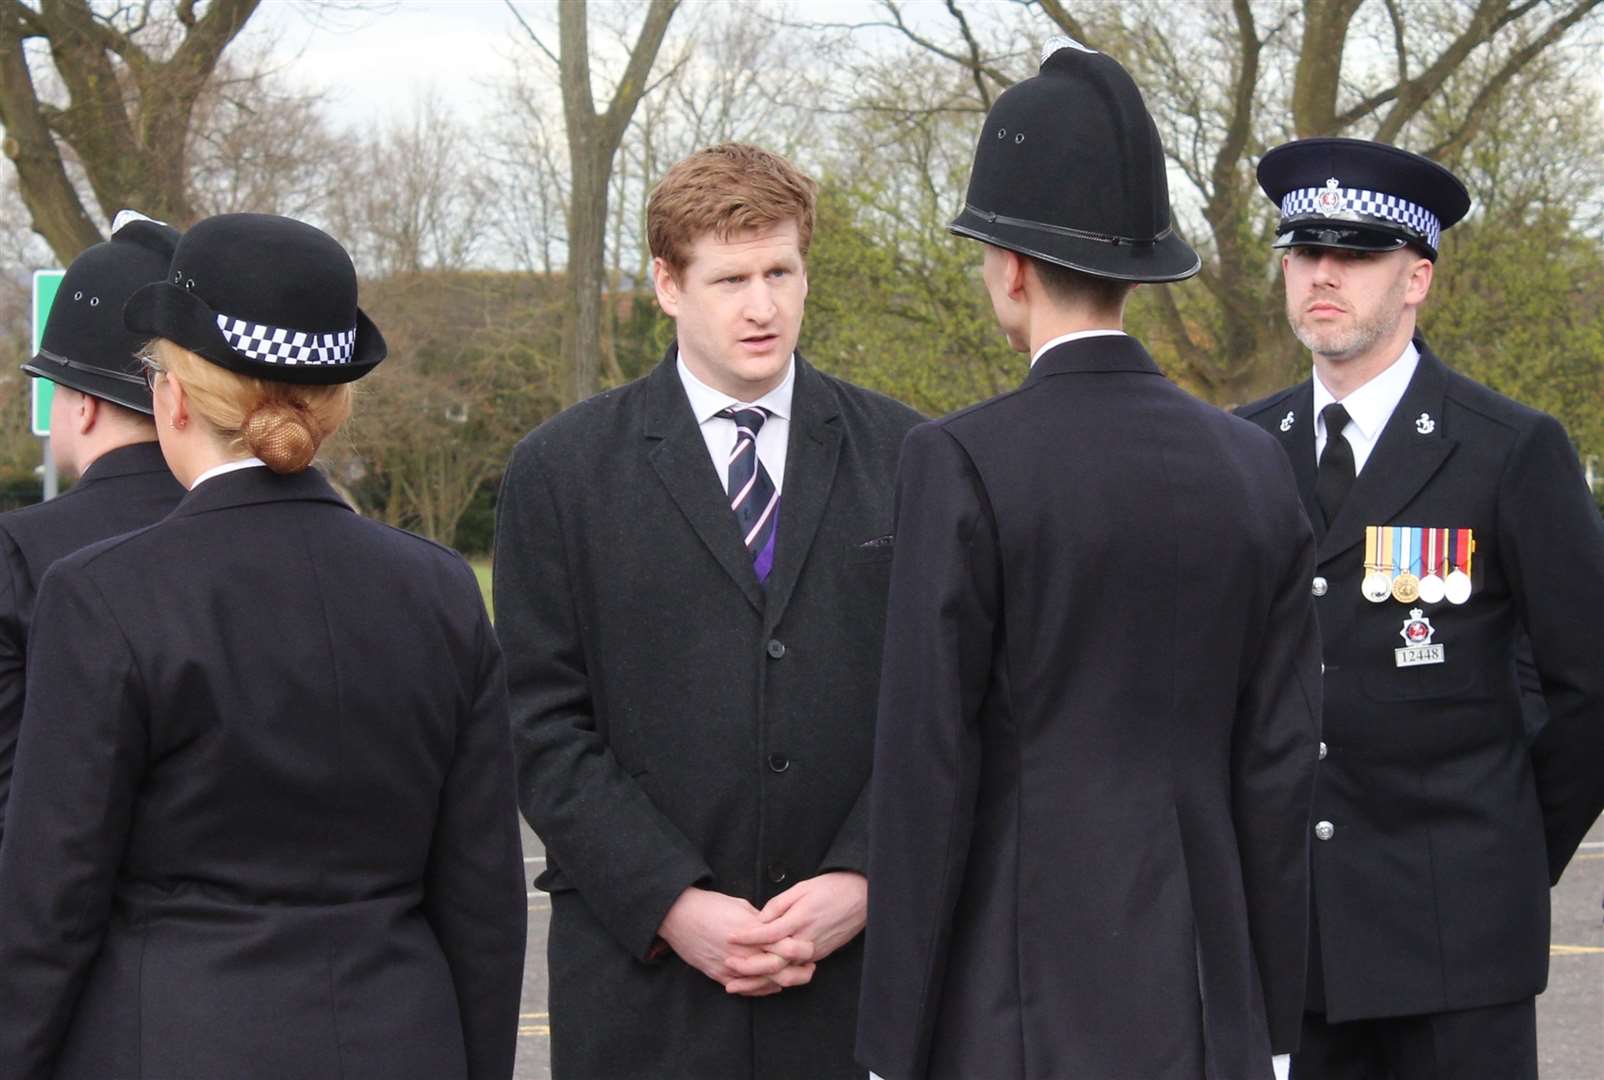 PCC Matthew Scott meeting some of the new officers